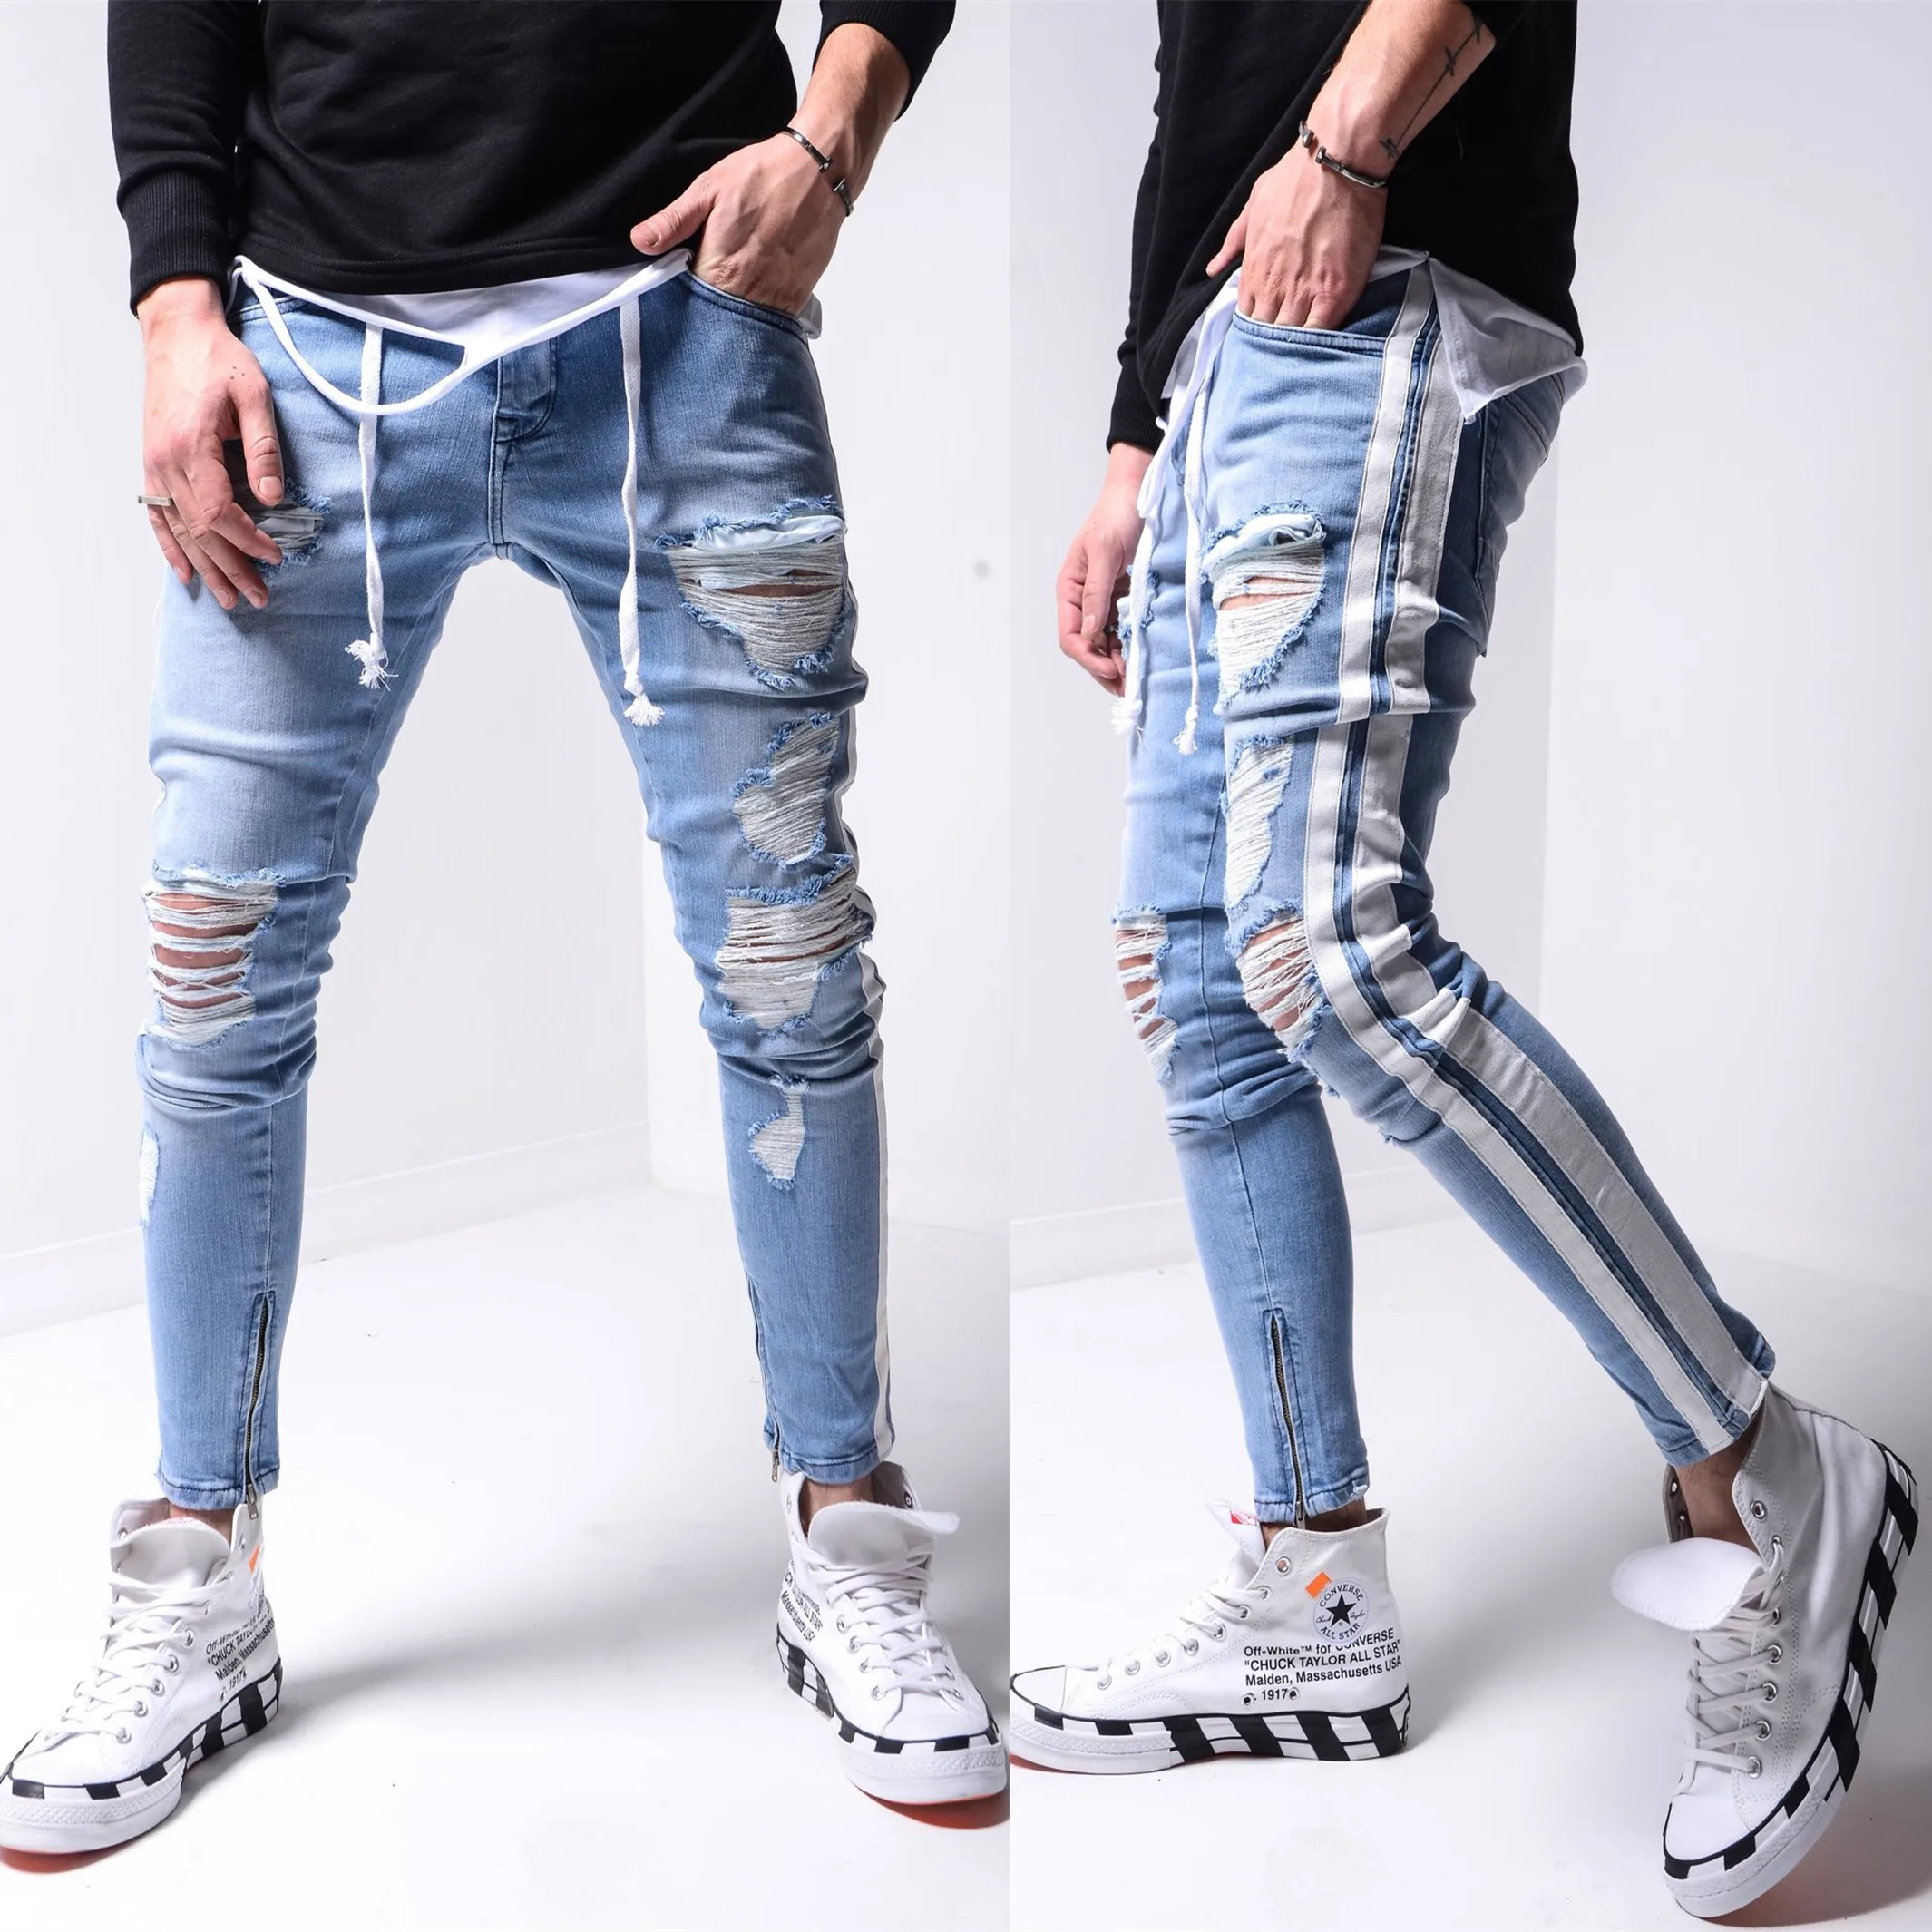 

2023 New Mens Solid Color Striped Jeans Male Hip Hop Foot Zipper Skinny Jeans Ripped Slim Denim Pants For Men Trousers Hommes